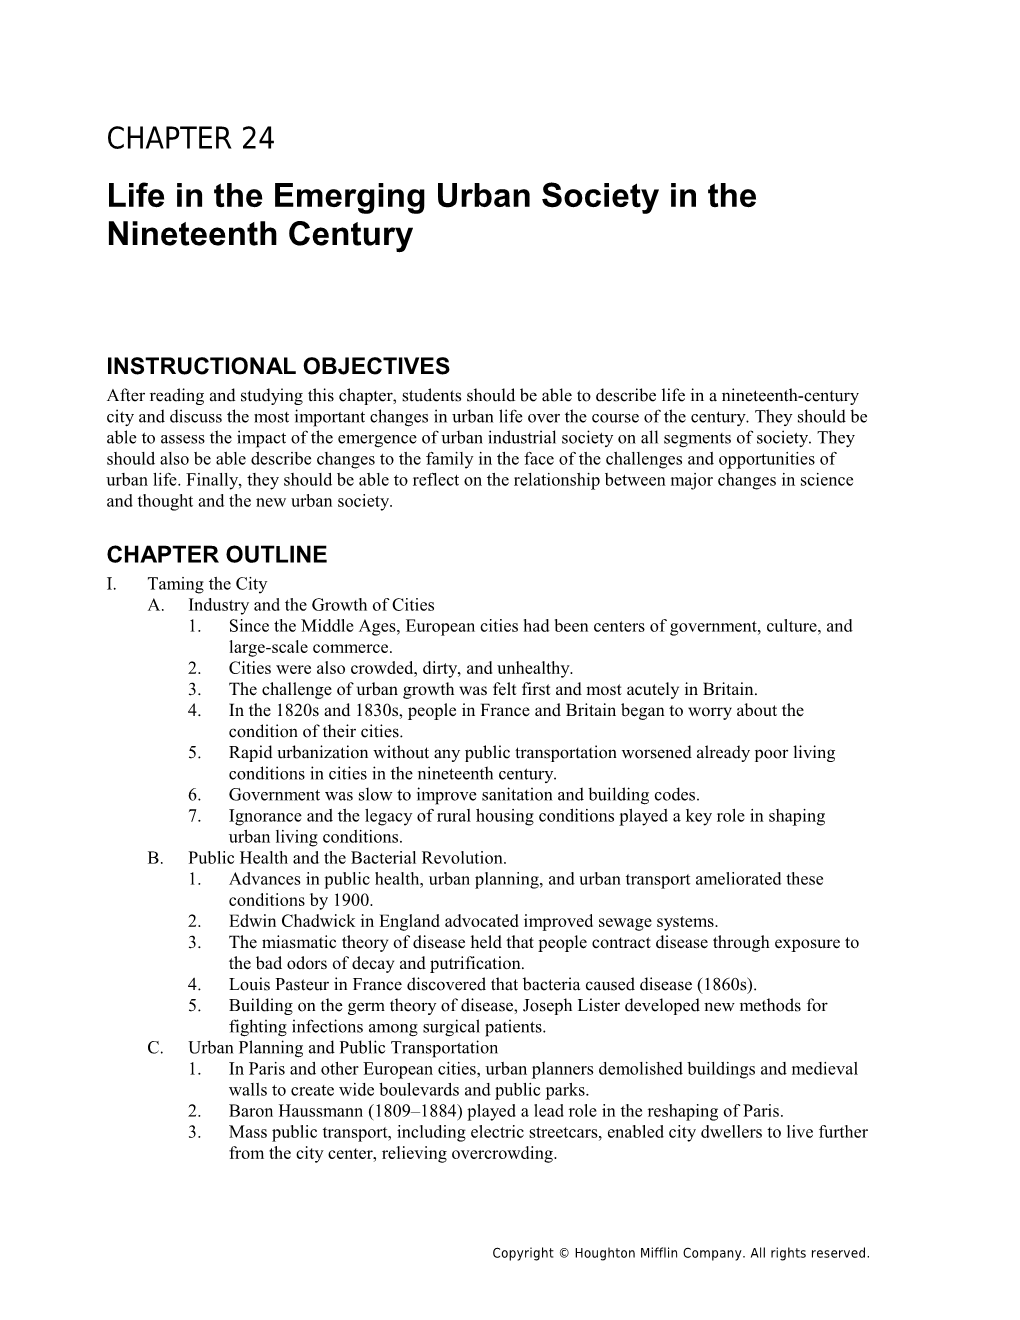 Chapter 24: Life in the Emerging Urban Society in the Nineteenth Century 1